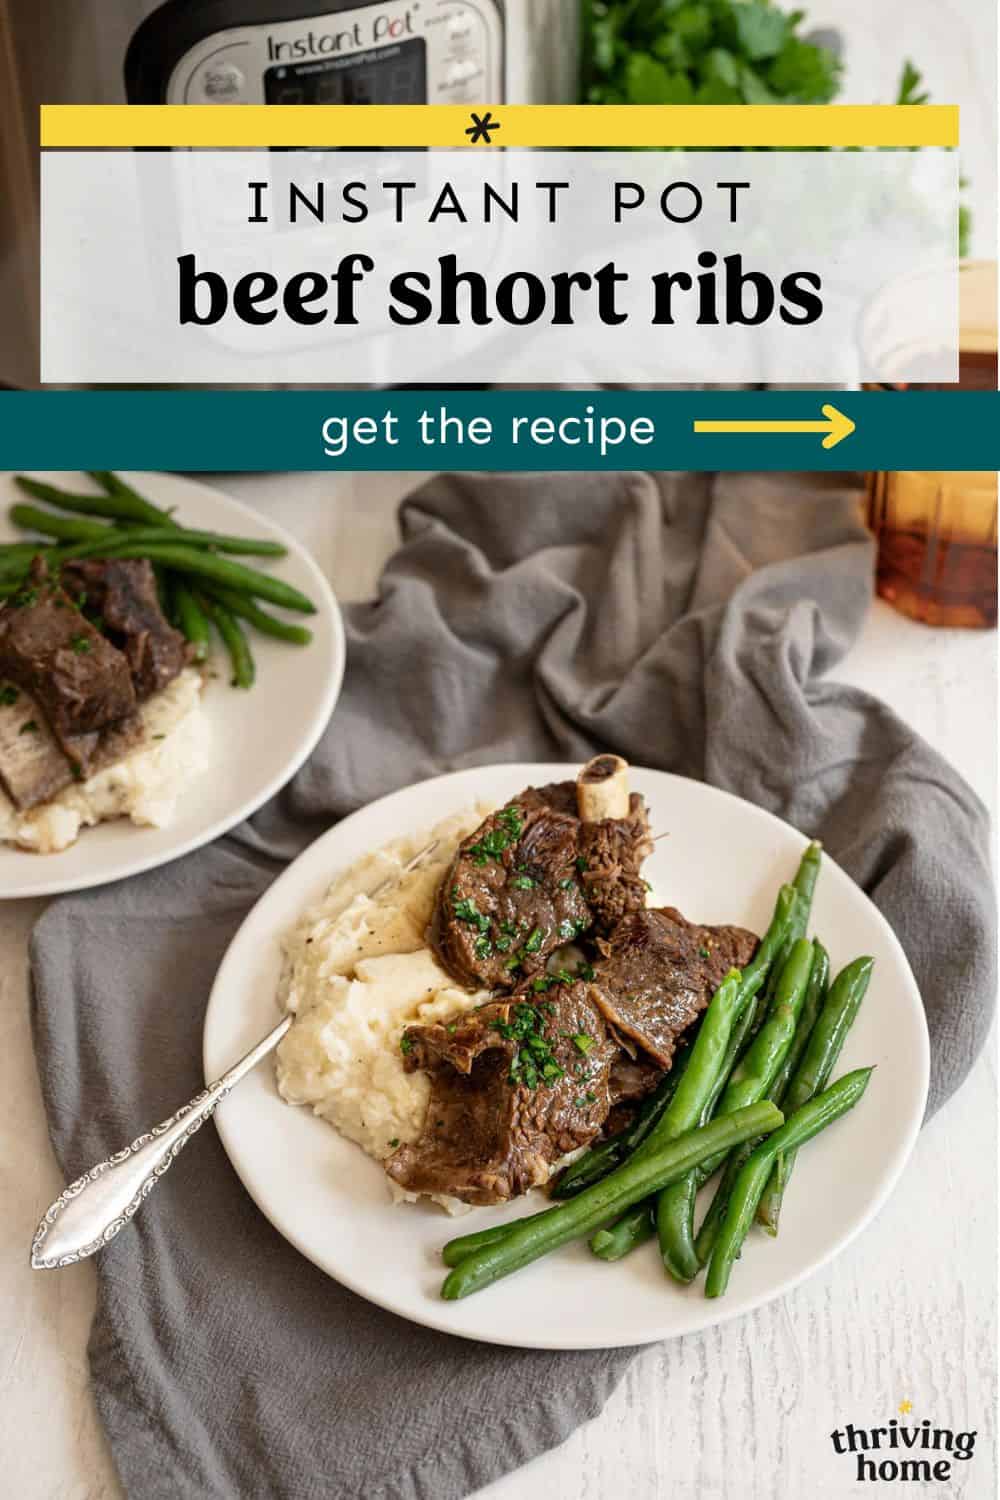 Instant pot beef short ribs on white plates over mashed potatoes with green beans on the side.